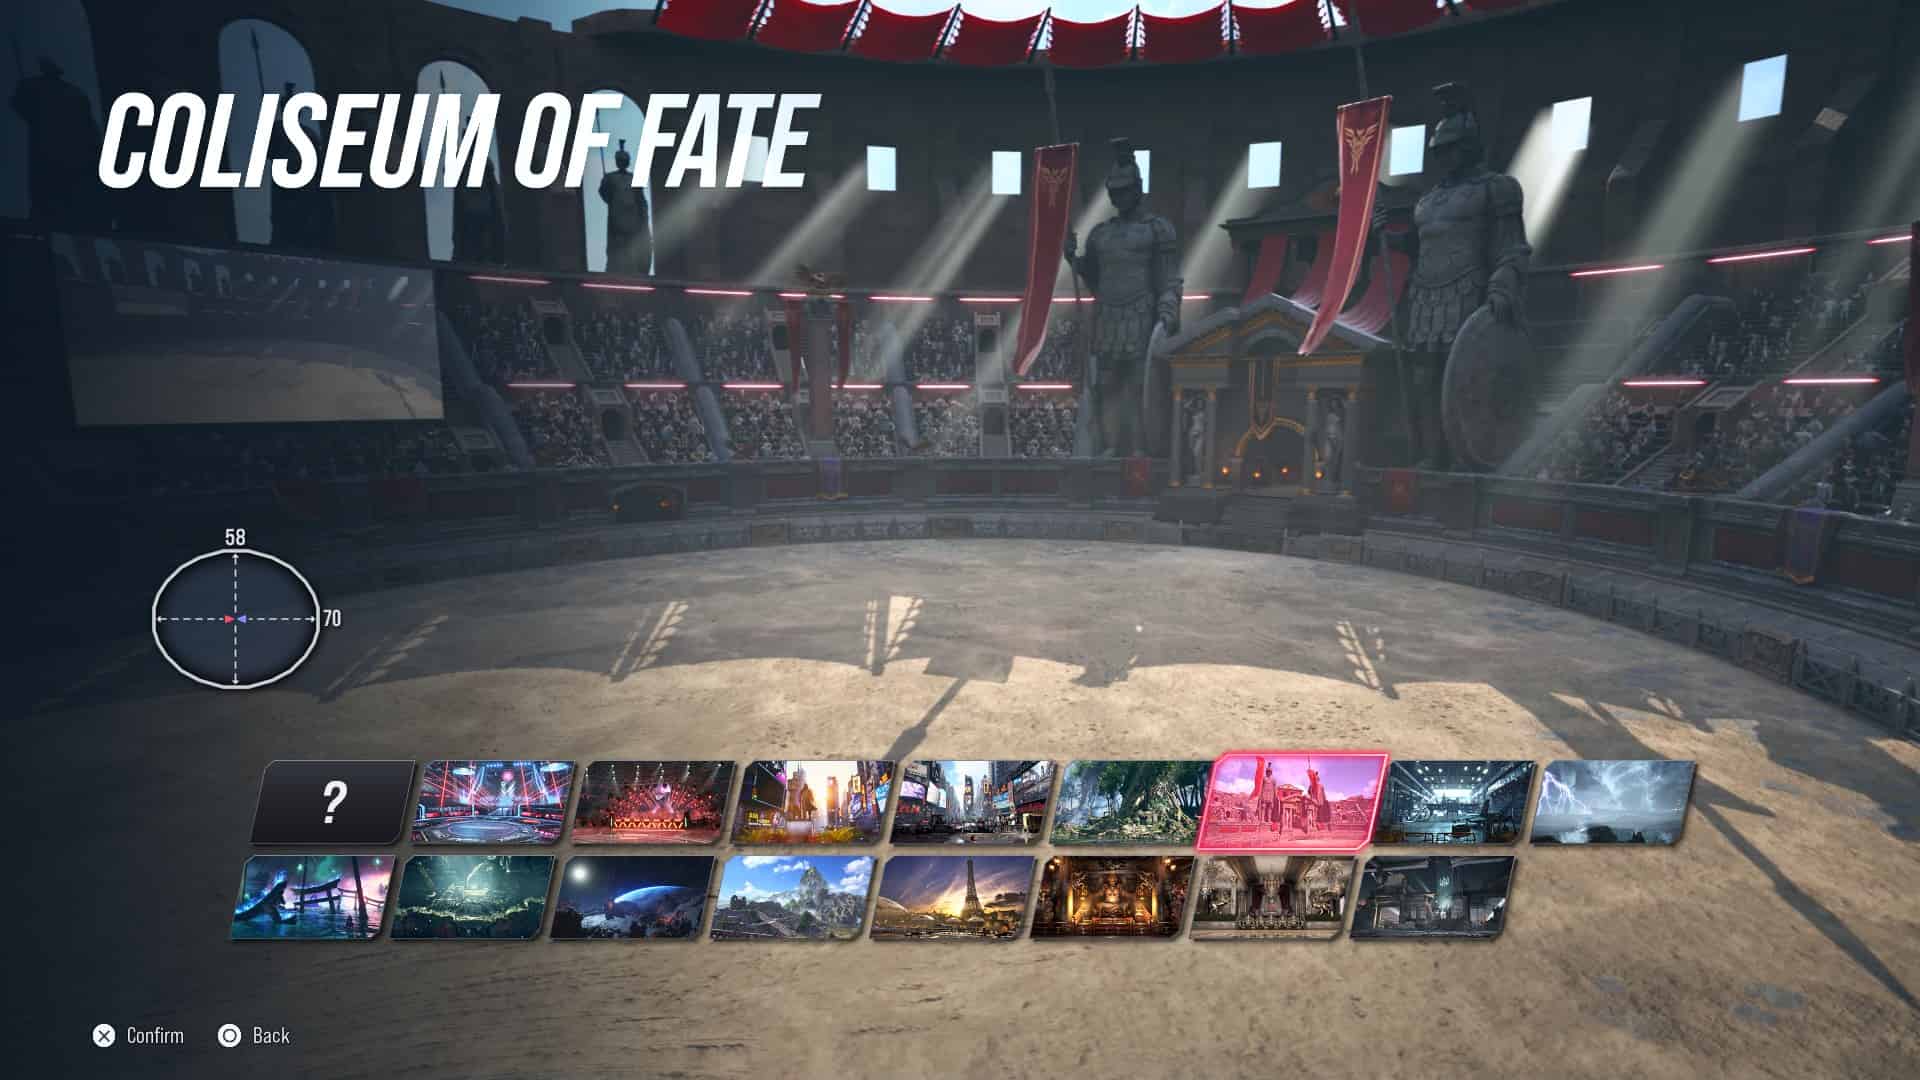 Tekken 8 stages: The Coliseum of Fate stage in the stage select screen